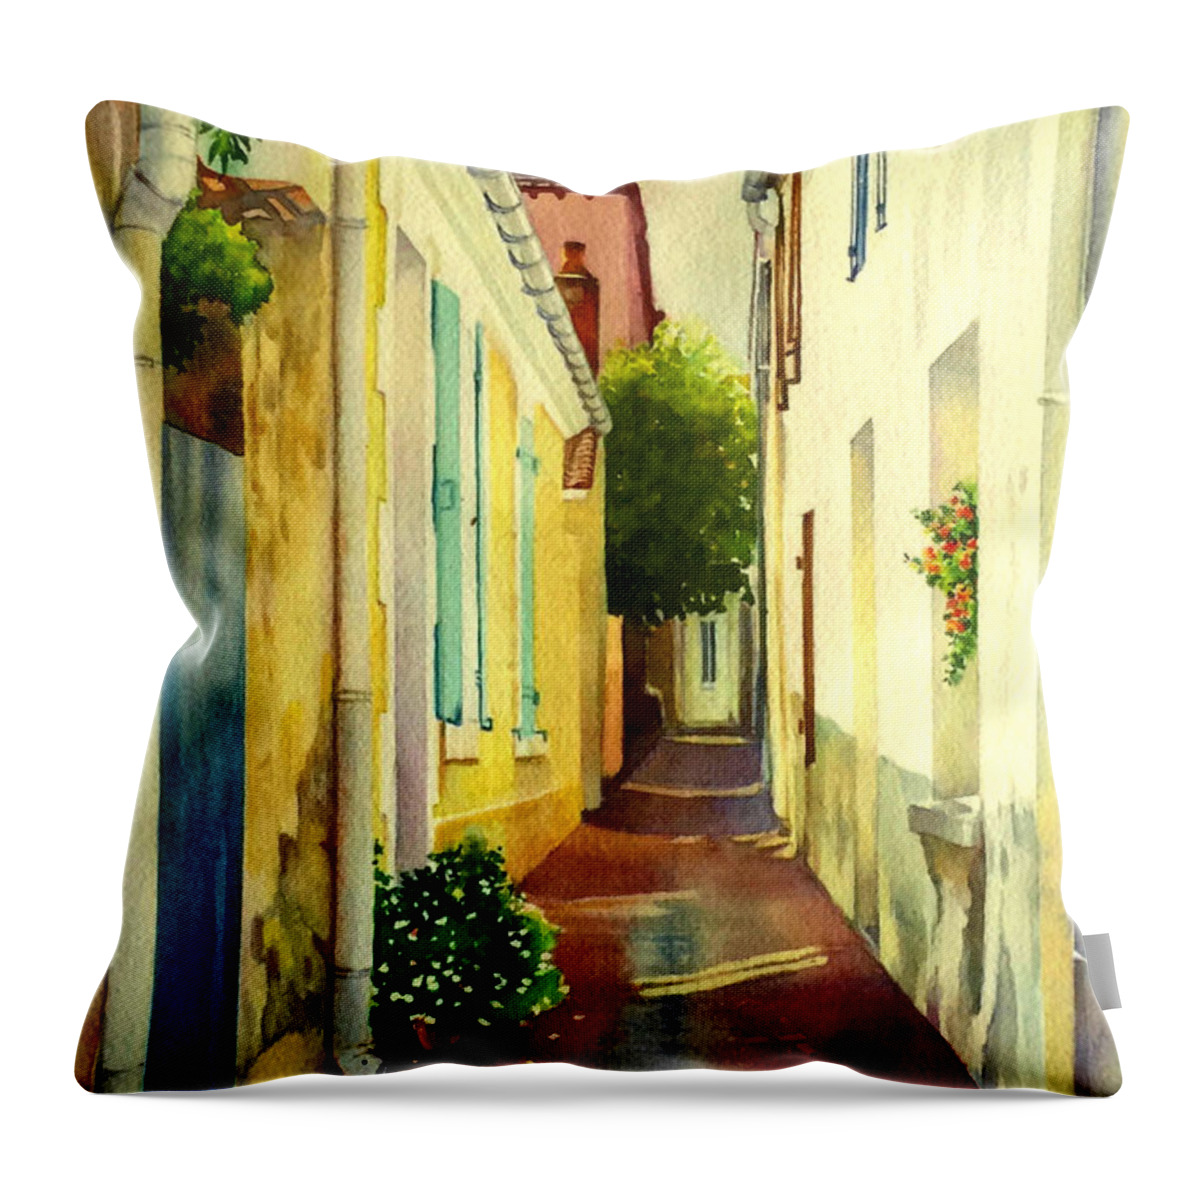 Rue Throw Pillow featuring the painting Ruelle - La Chaume - Vendee - France by Francoise Chauray